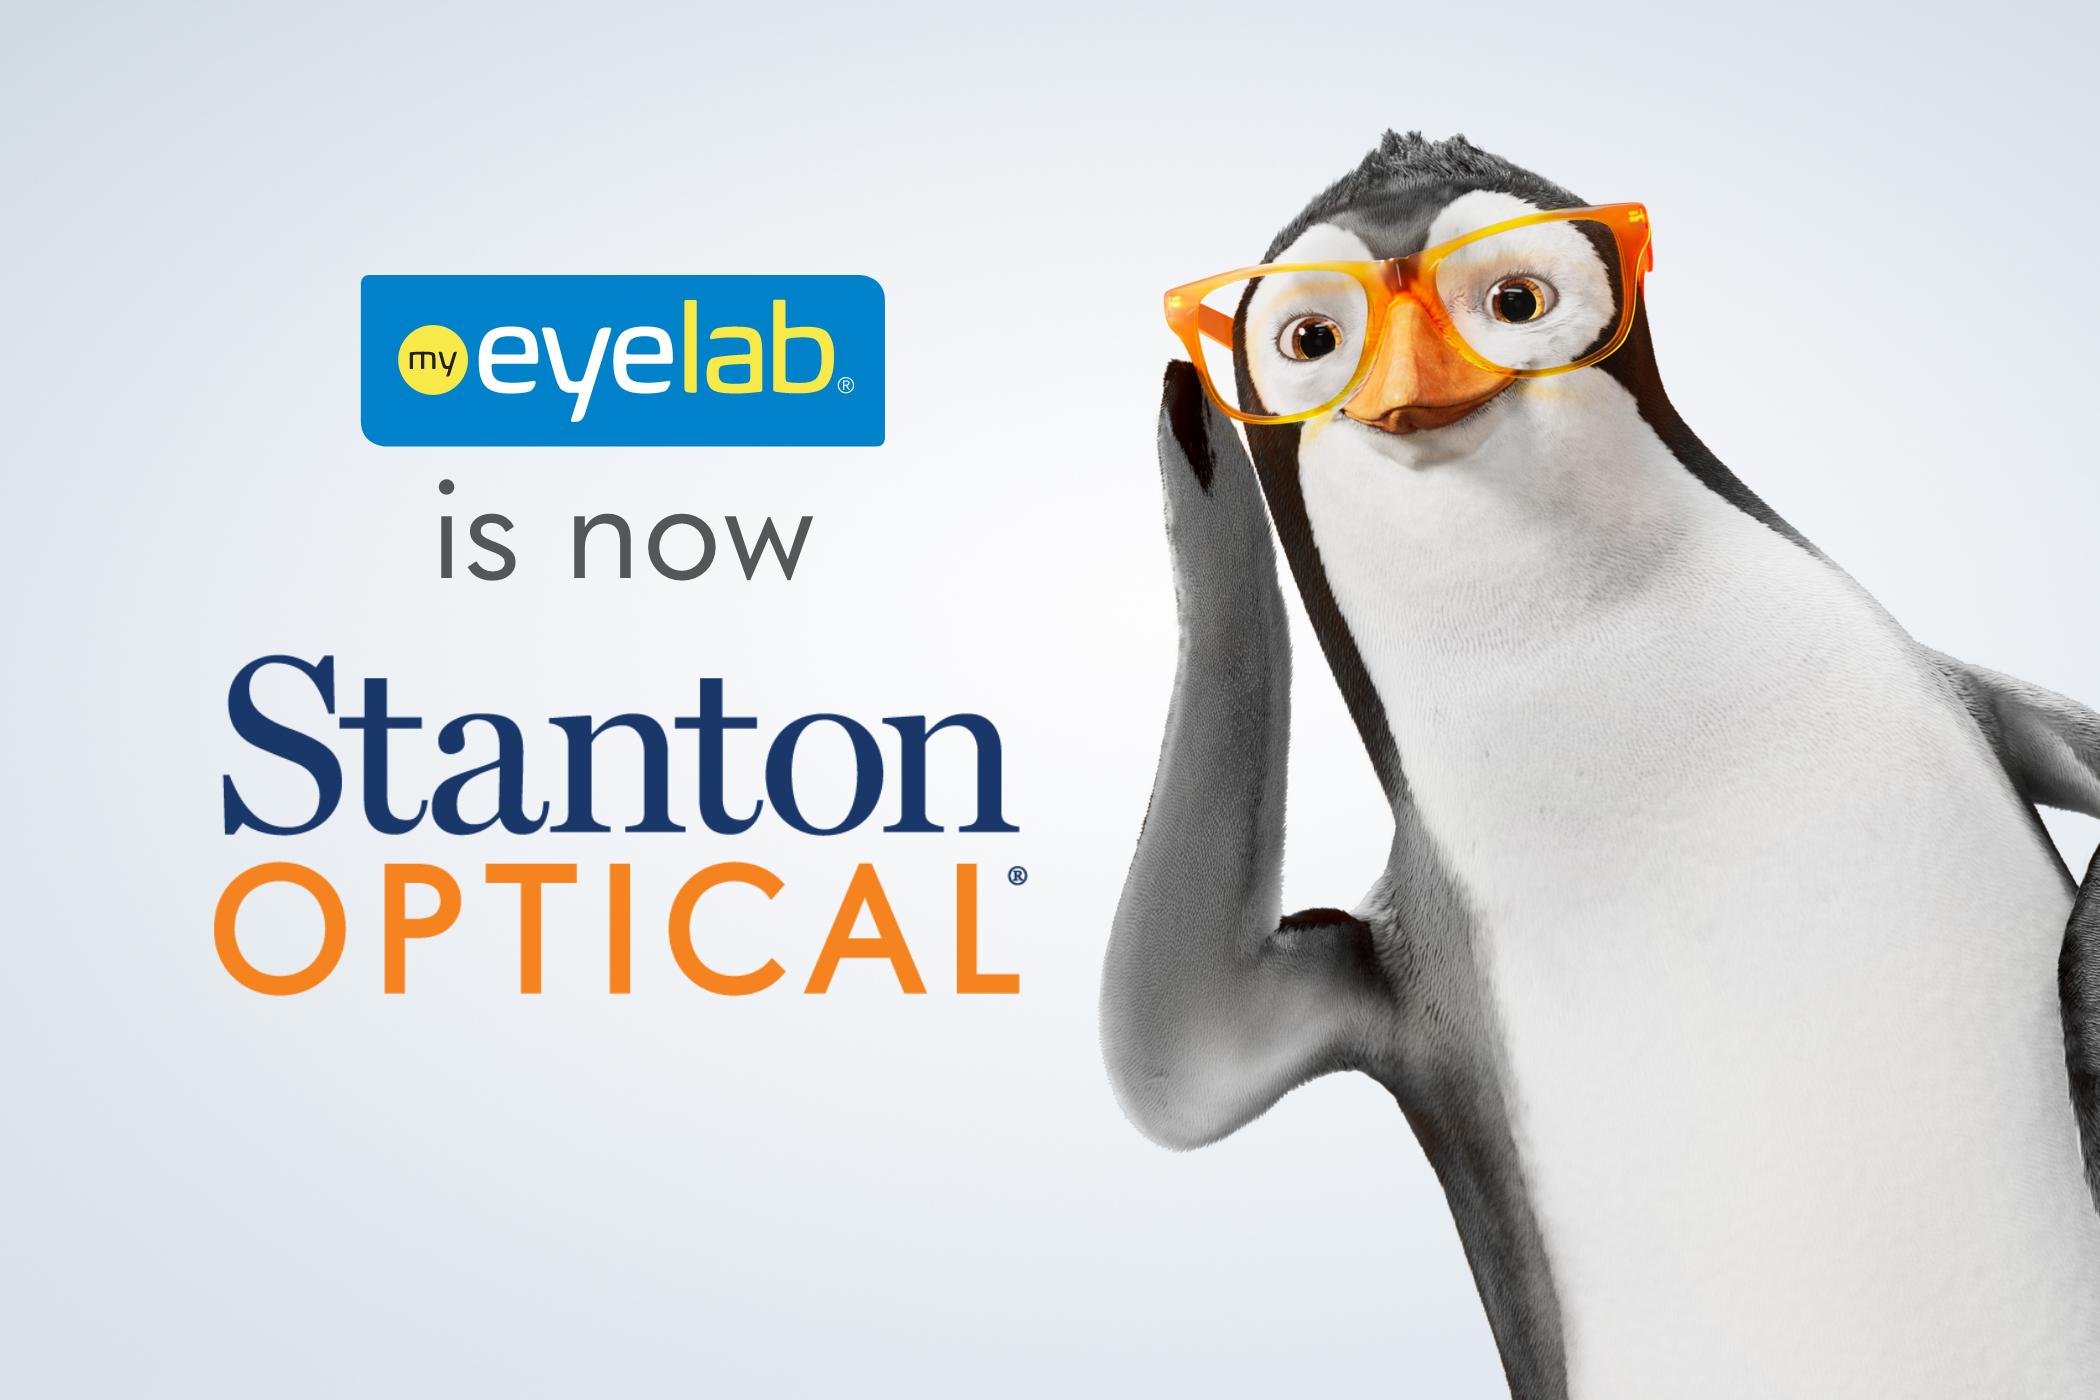 My Eyelab is now Stanton Optical! Check out our perks in addition to faster service and better value at the same convenient location.​